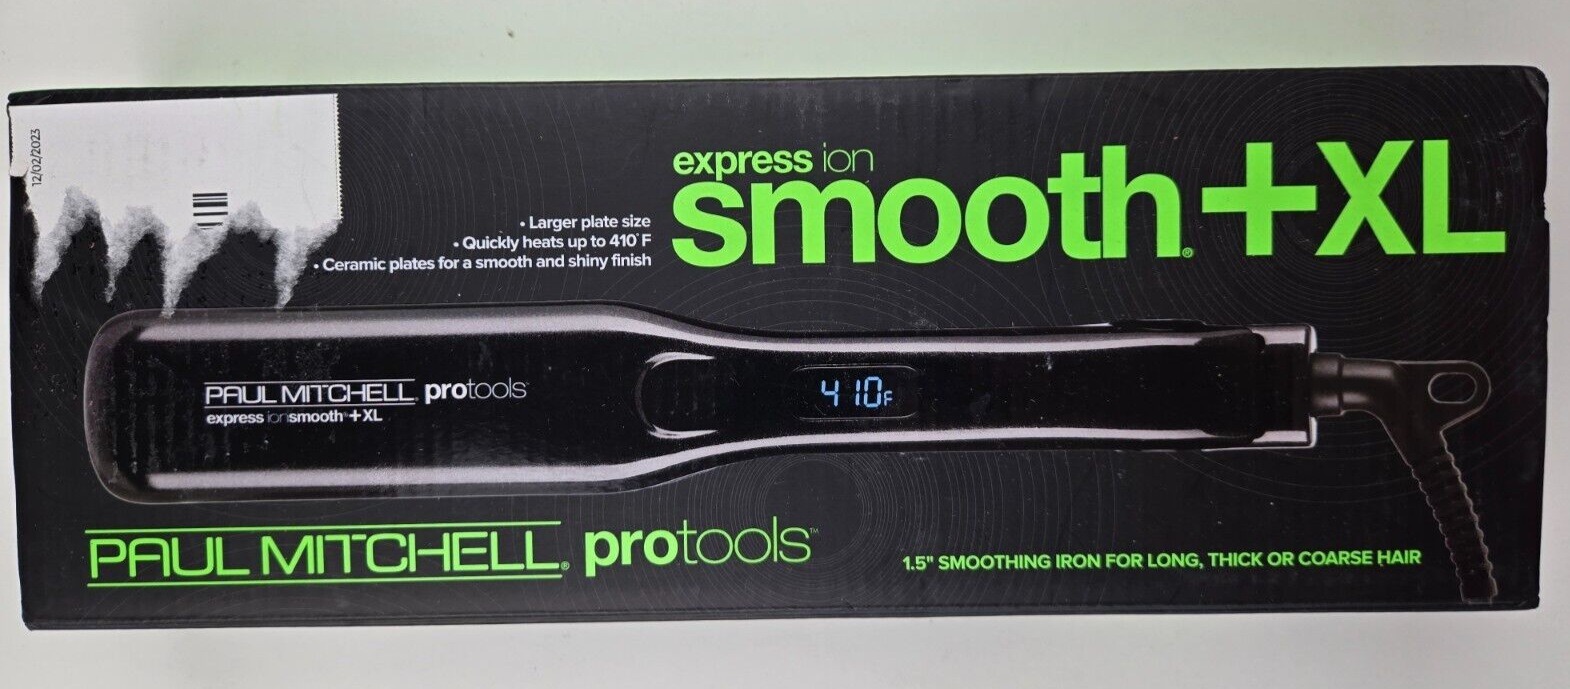 PAUL MITCHELL Express Ion Smooth+ Straightening Ceramic All Corded Digital - $98.01